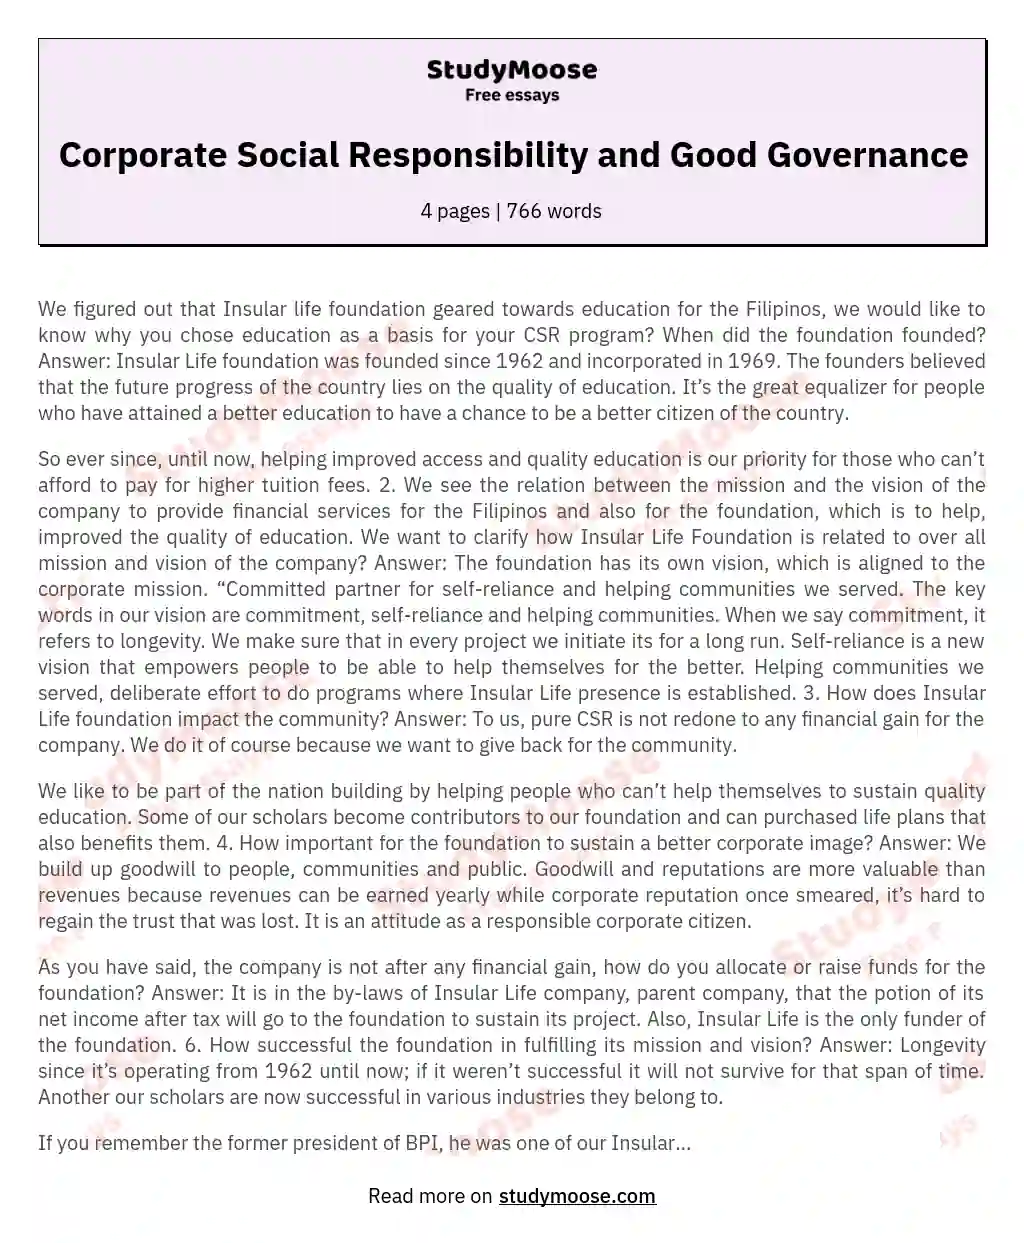 Corporate Social Responsibility and Good Governance